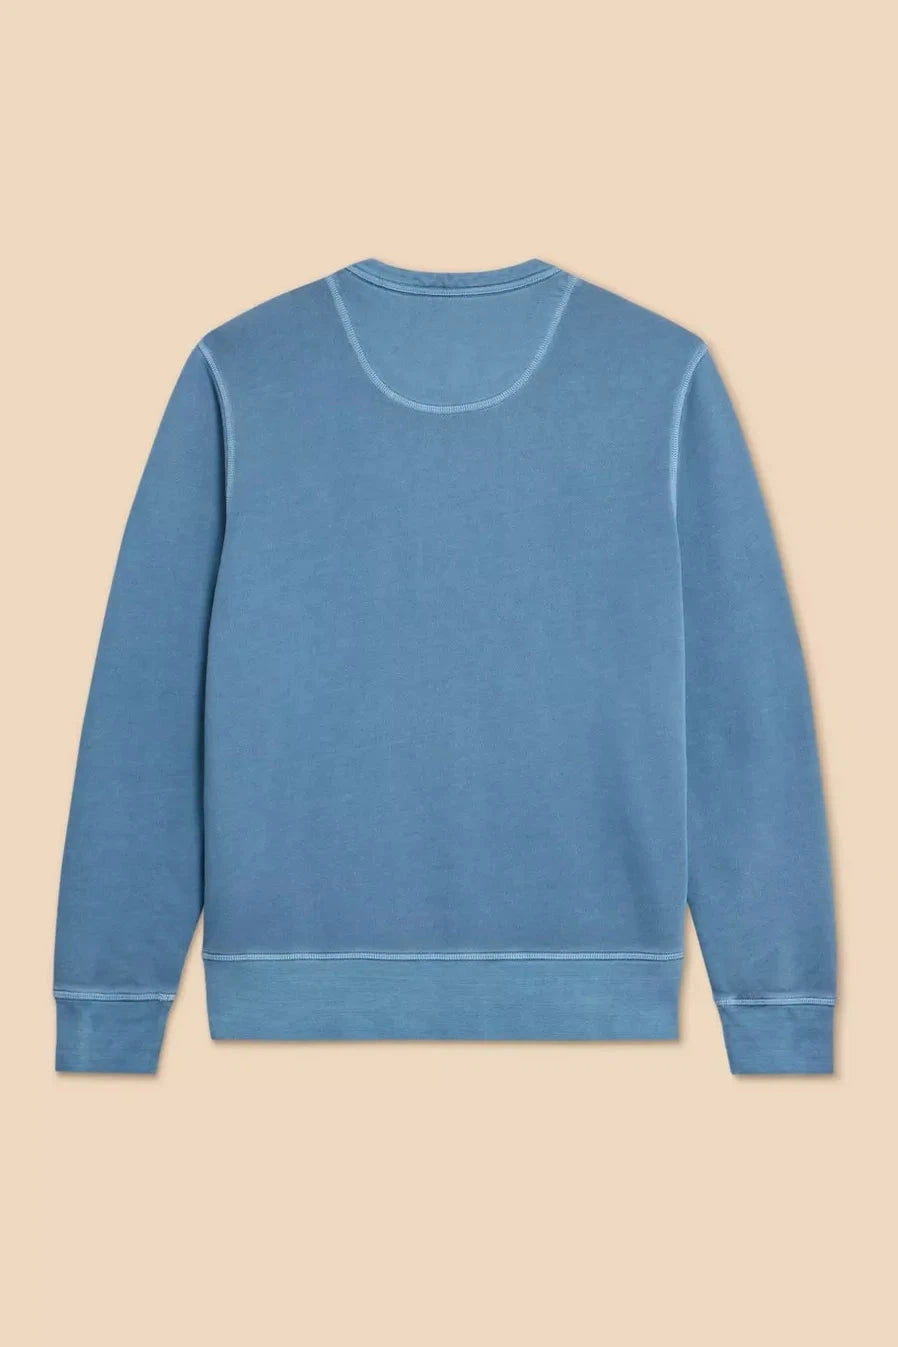 White Stuff Crew Neck Sweat in Mid Blue-Mens-Ohh! By Gum - Shop Sustainable